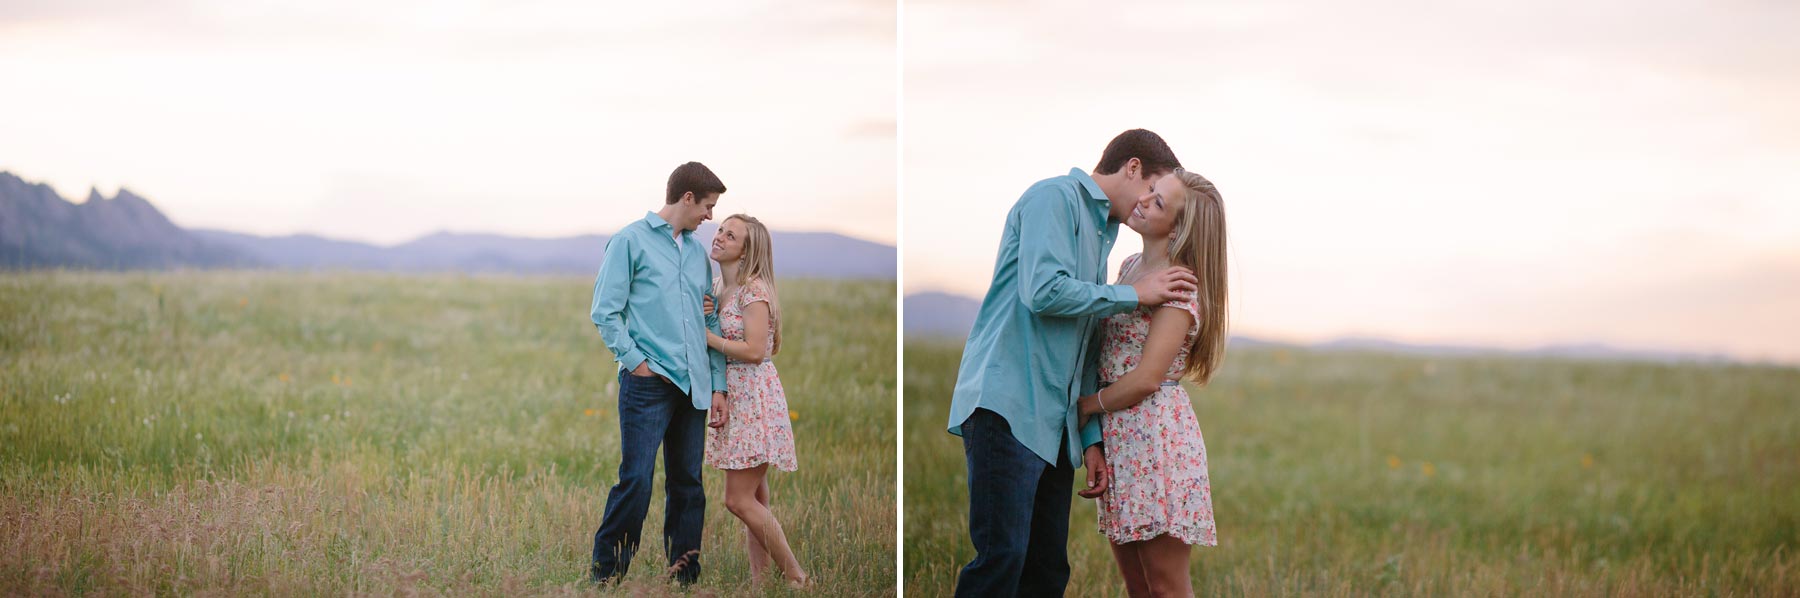 Irivng-Photography-Kerstyn-Korby-Colorado-Engagement-Photographers-020